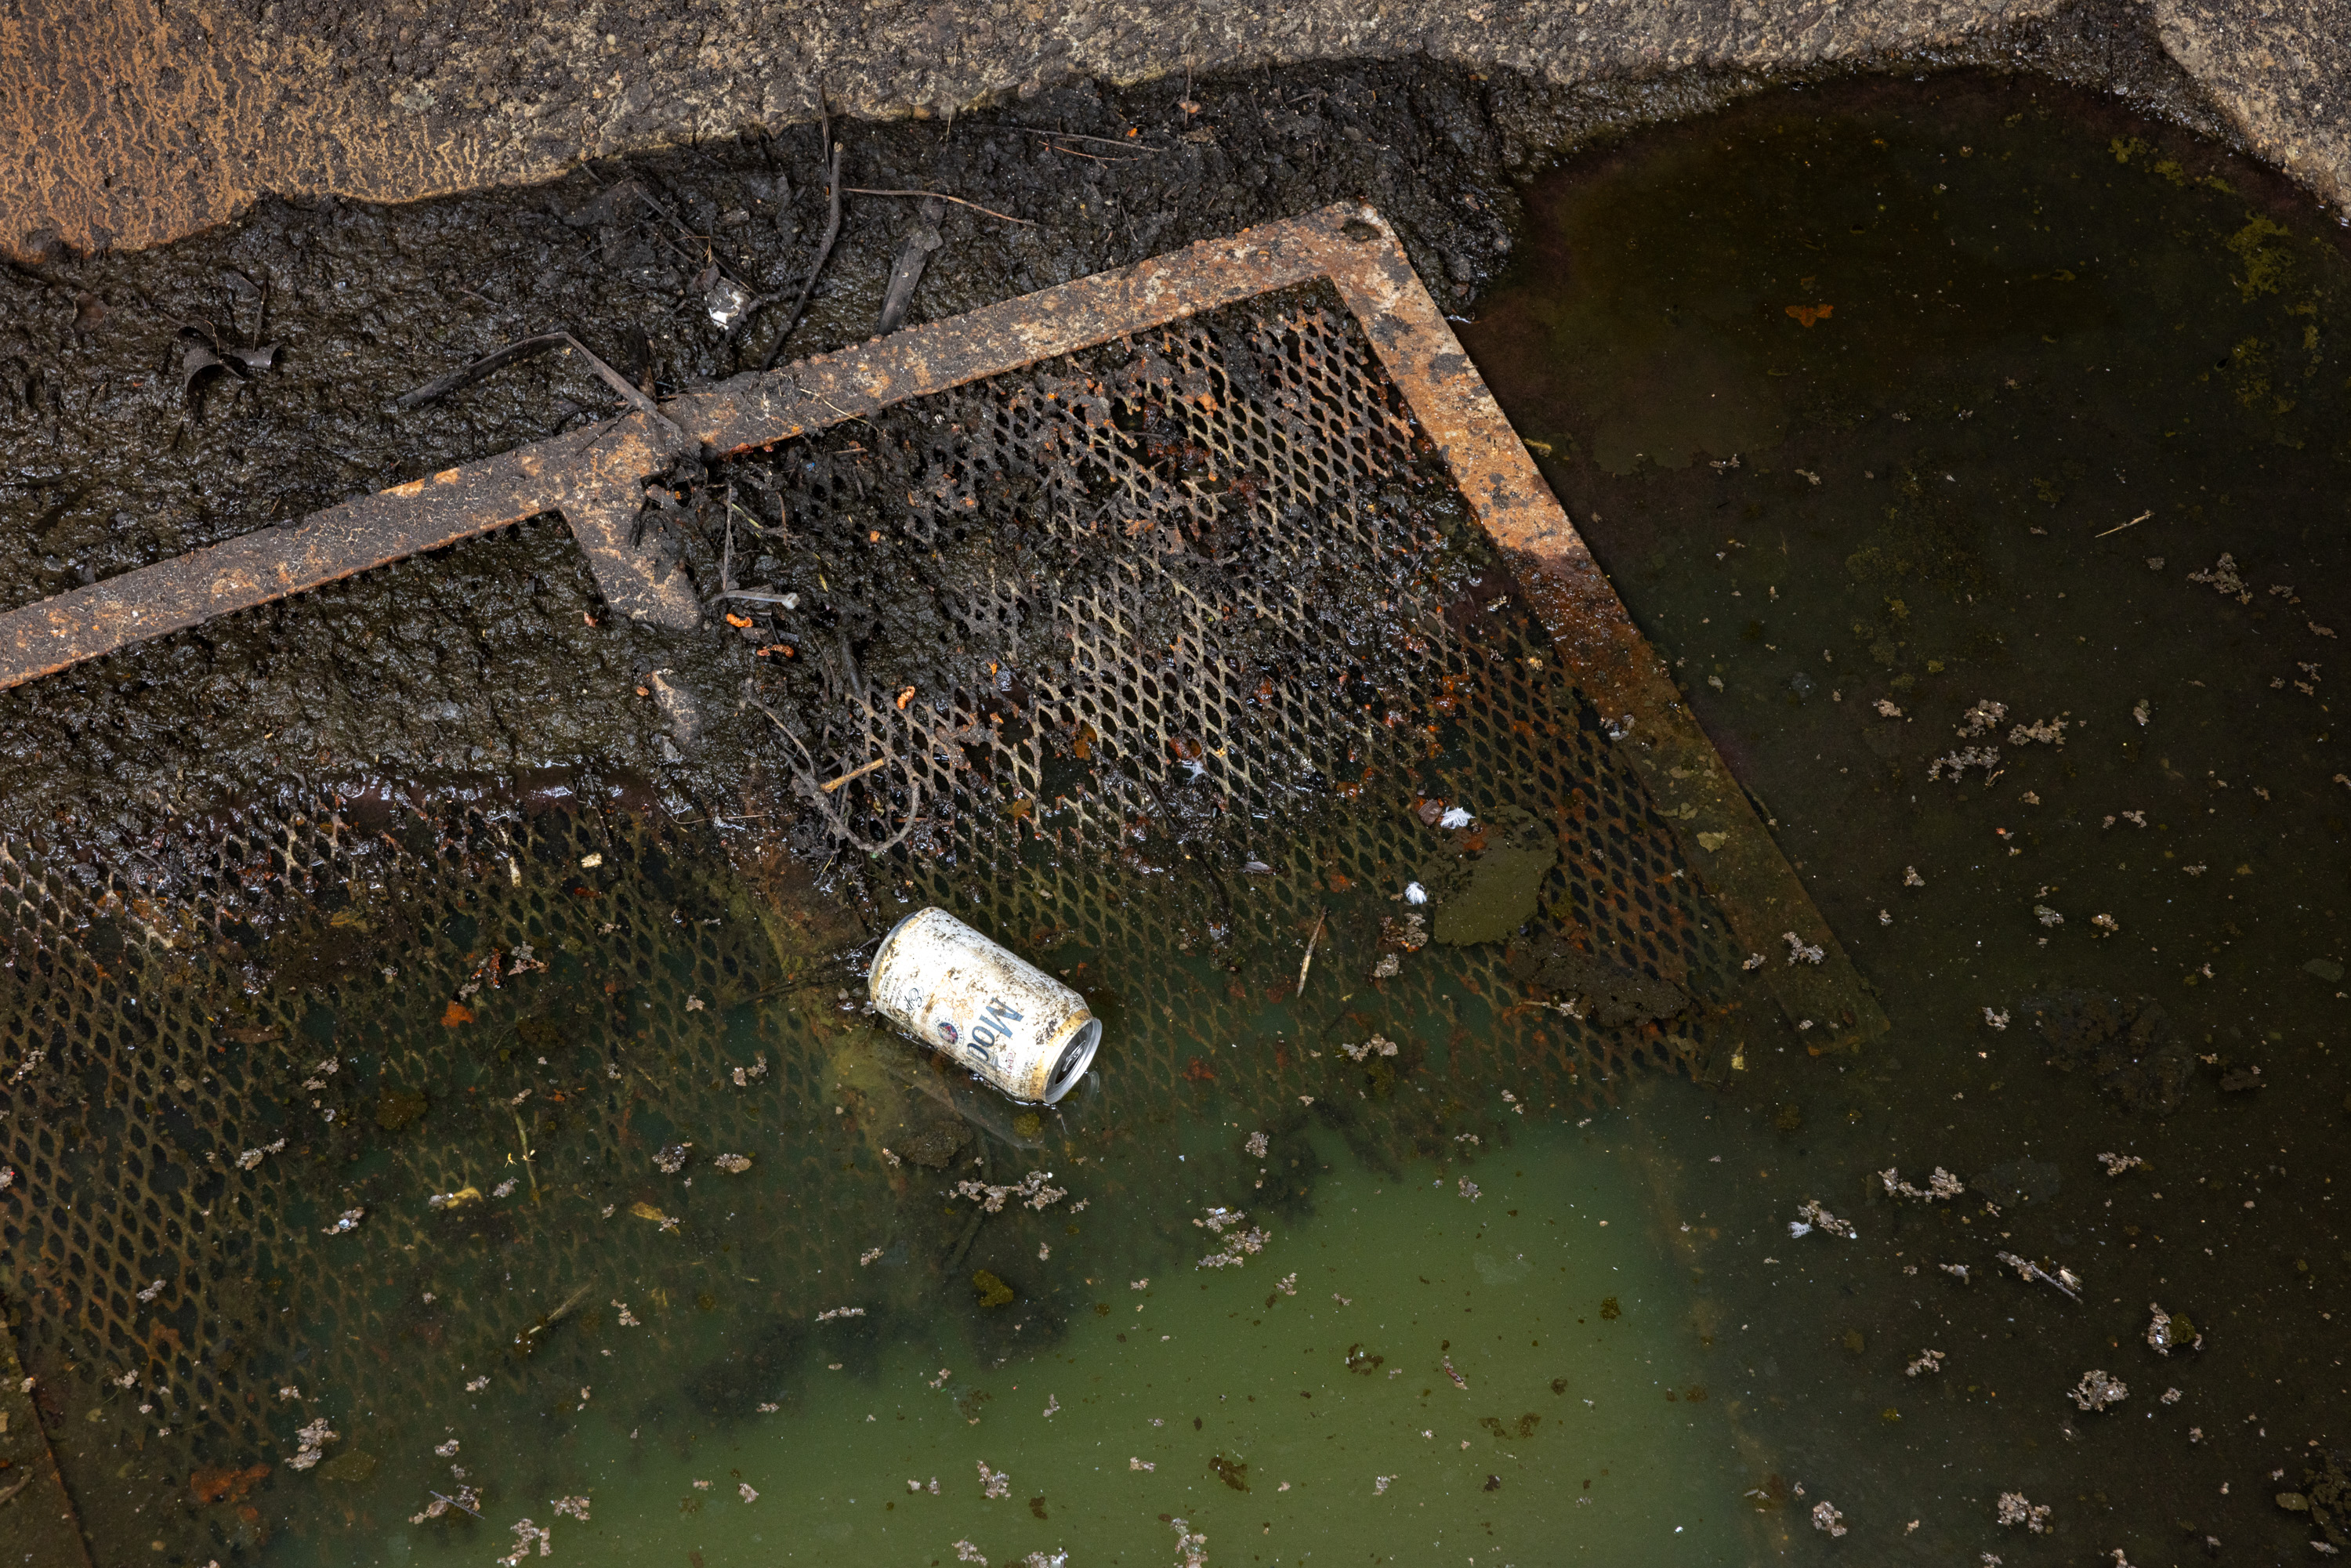 A discarded can lies on a rusted metal grate, partially submerged in murky green water with muddy debris surrounding it.